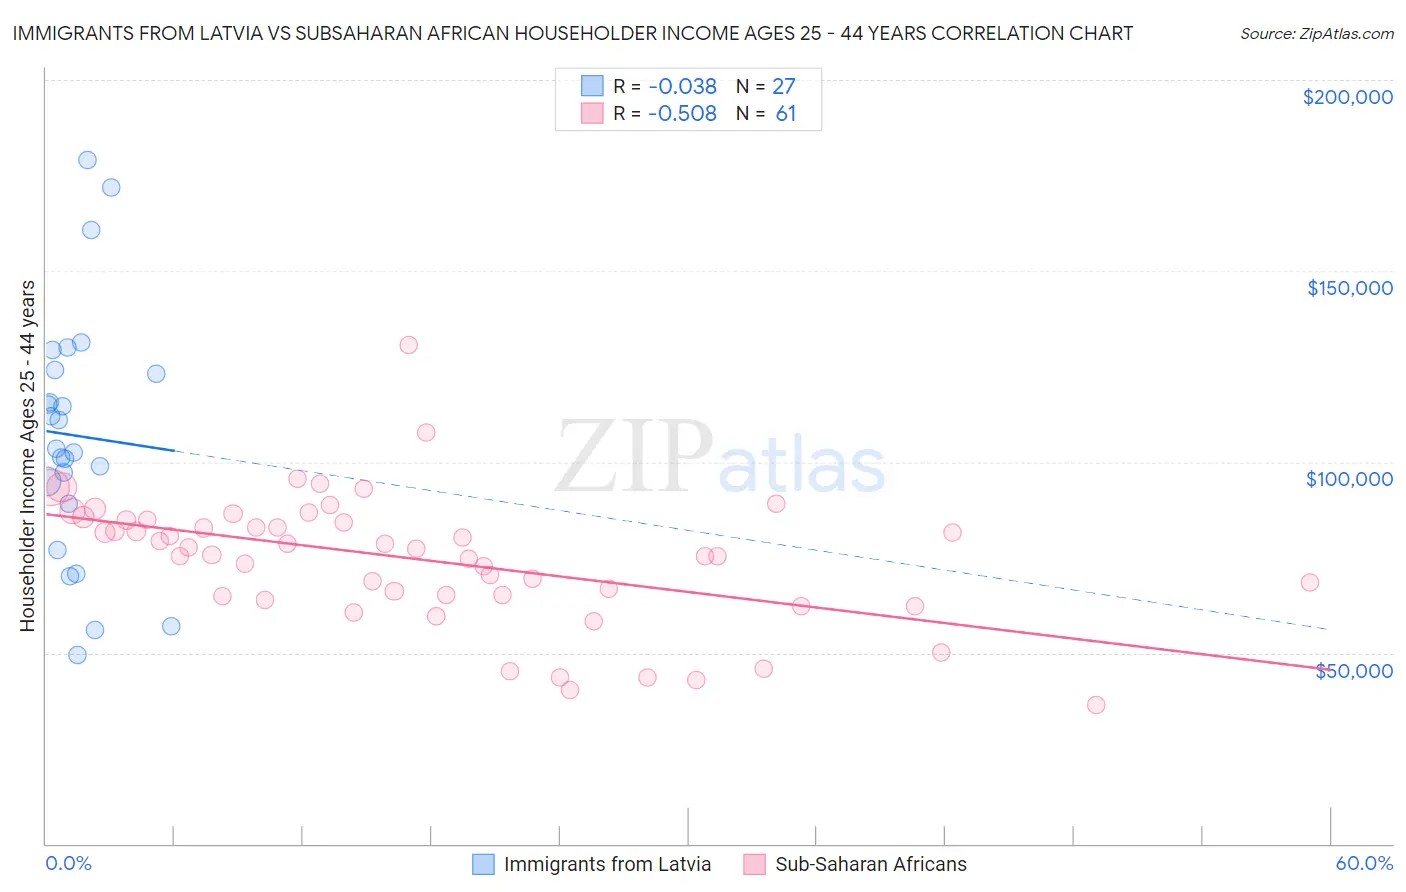 Immigrants from Latvia vs Subsaharan African Householder Income Ages 25 - 44 years